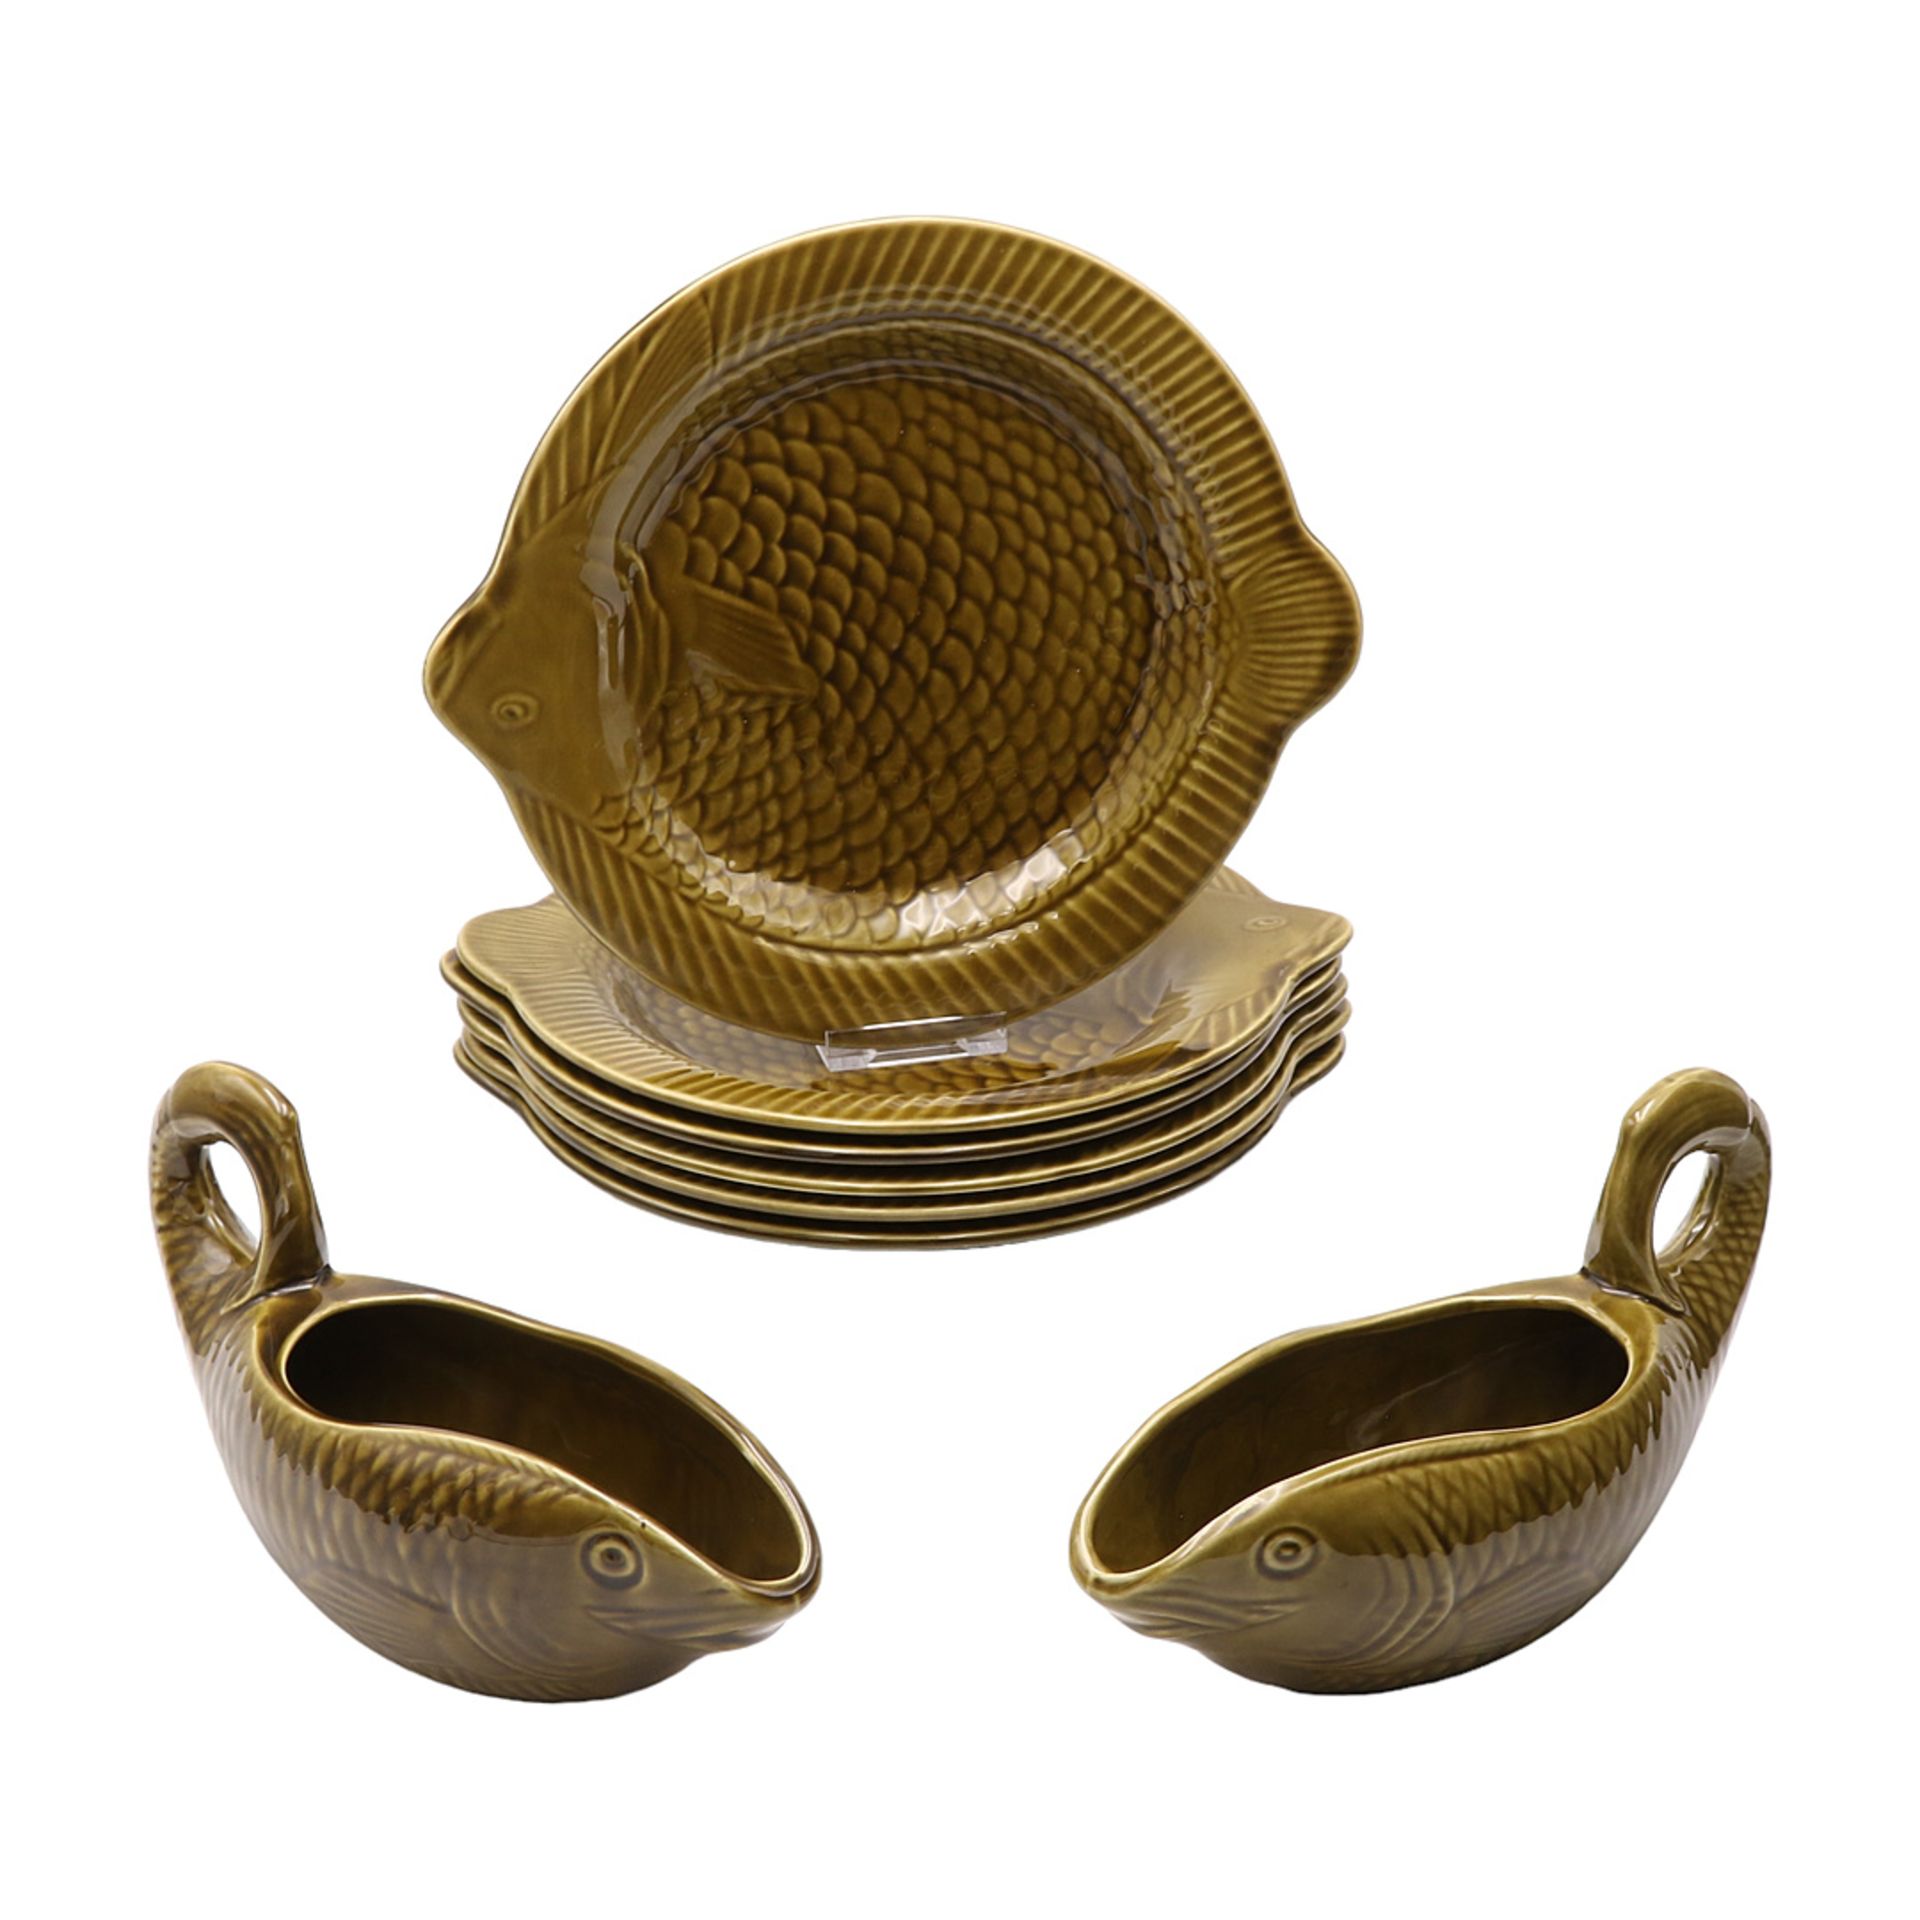 Six fish plates and two sauce boats, Sarreguemines, France, 2nd half of the 20th century